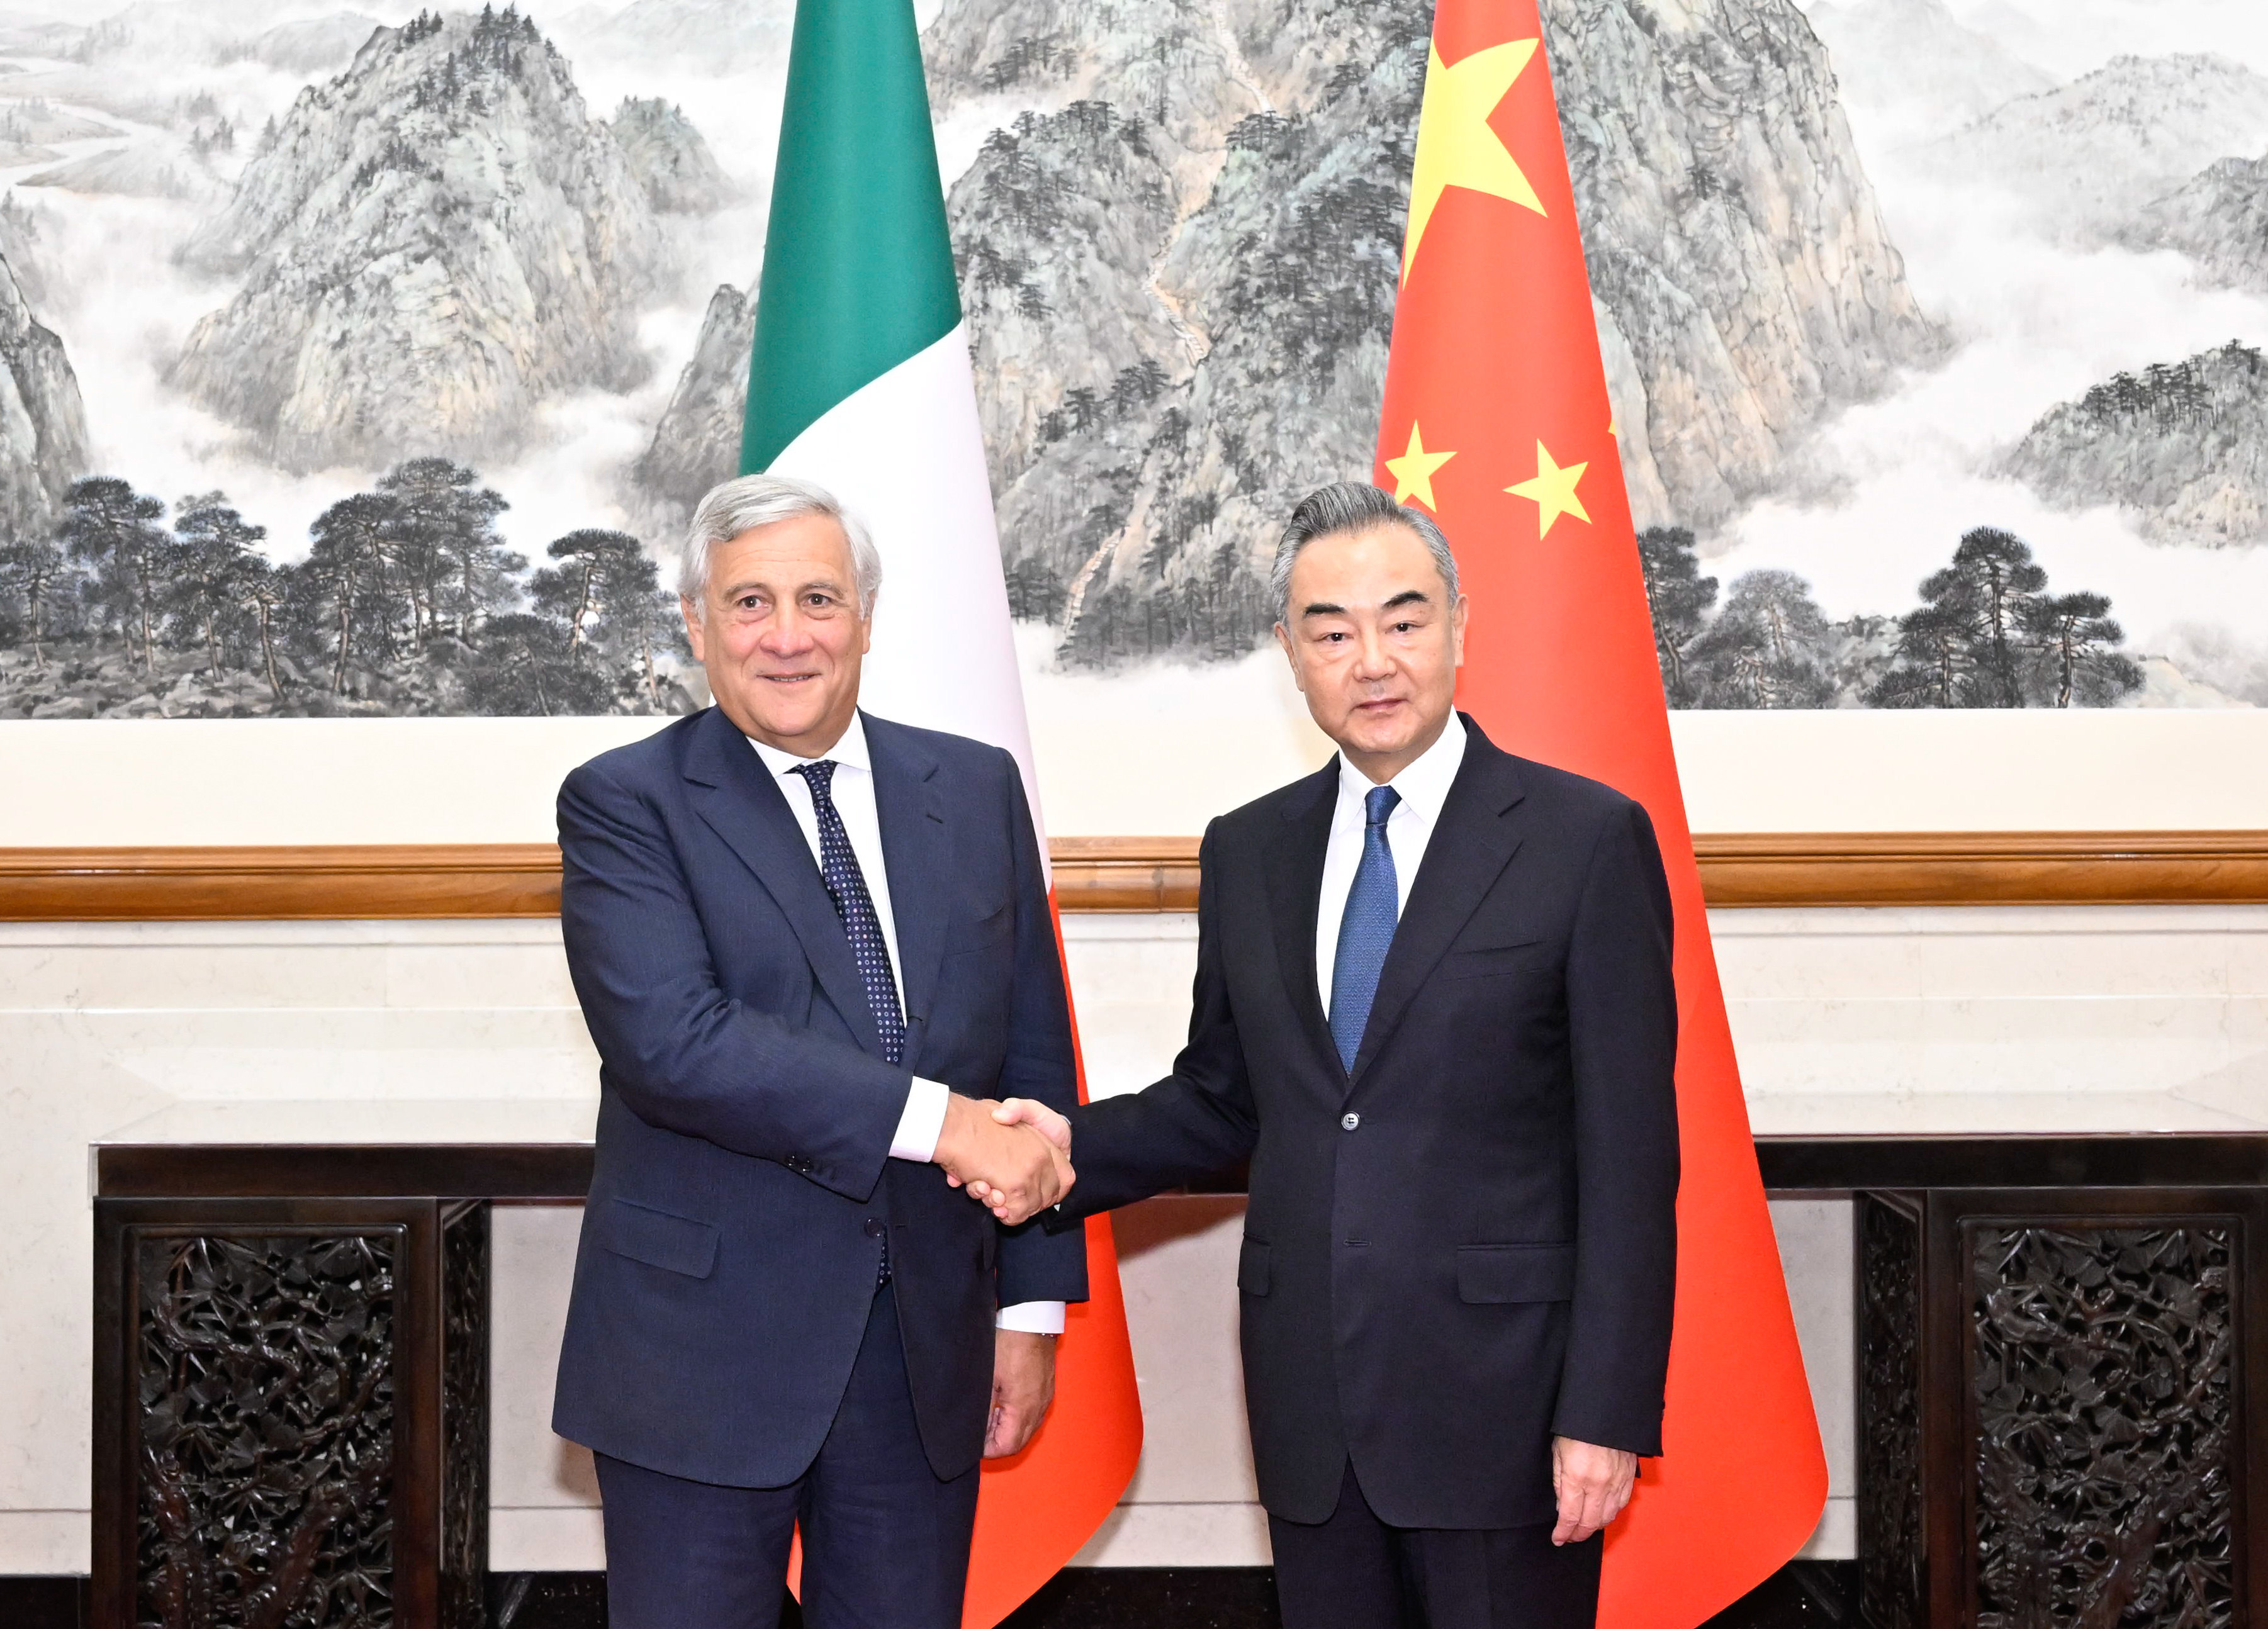 Italian Foreign Minister Antonio Tajani (left) and his Chinese counterpart Wang Yi in Beijing on Monday. Photo: Xinhua